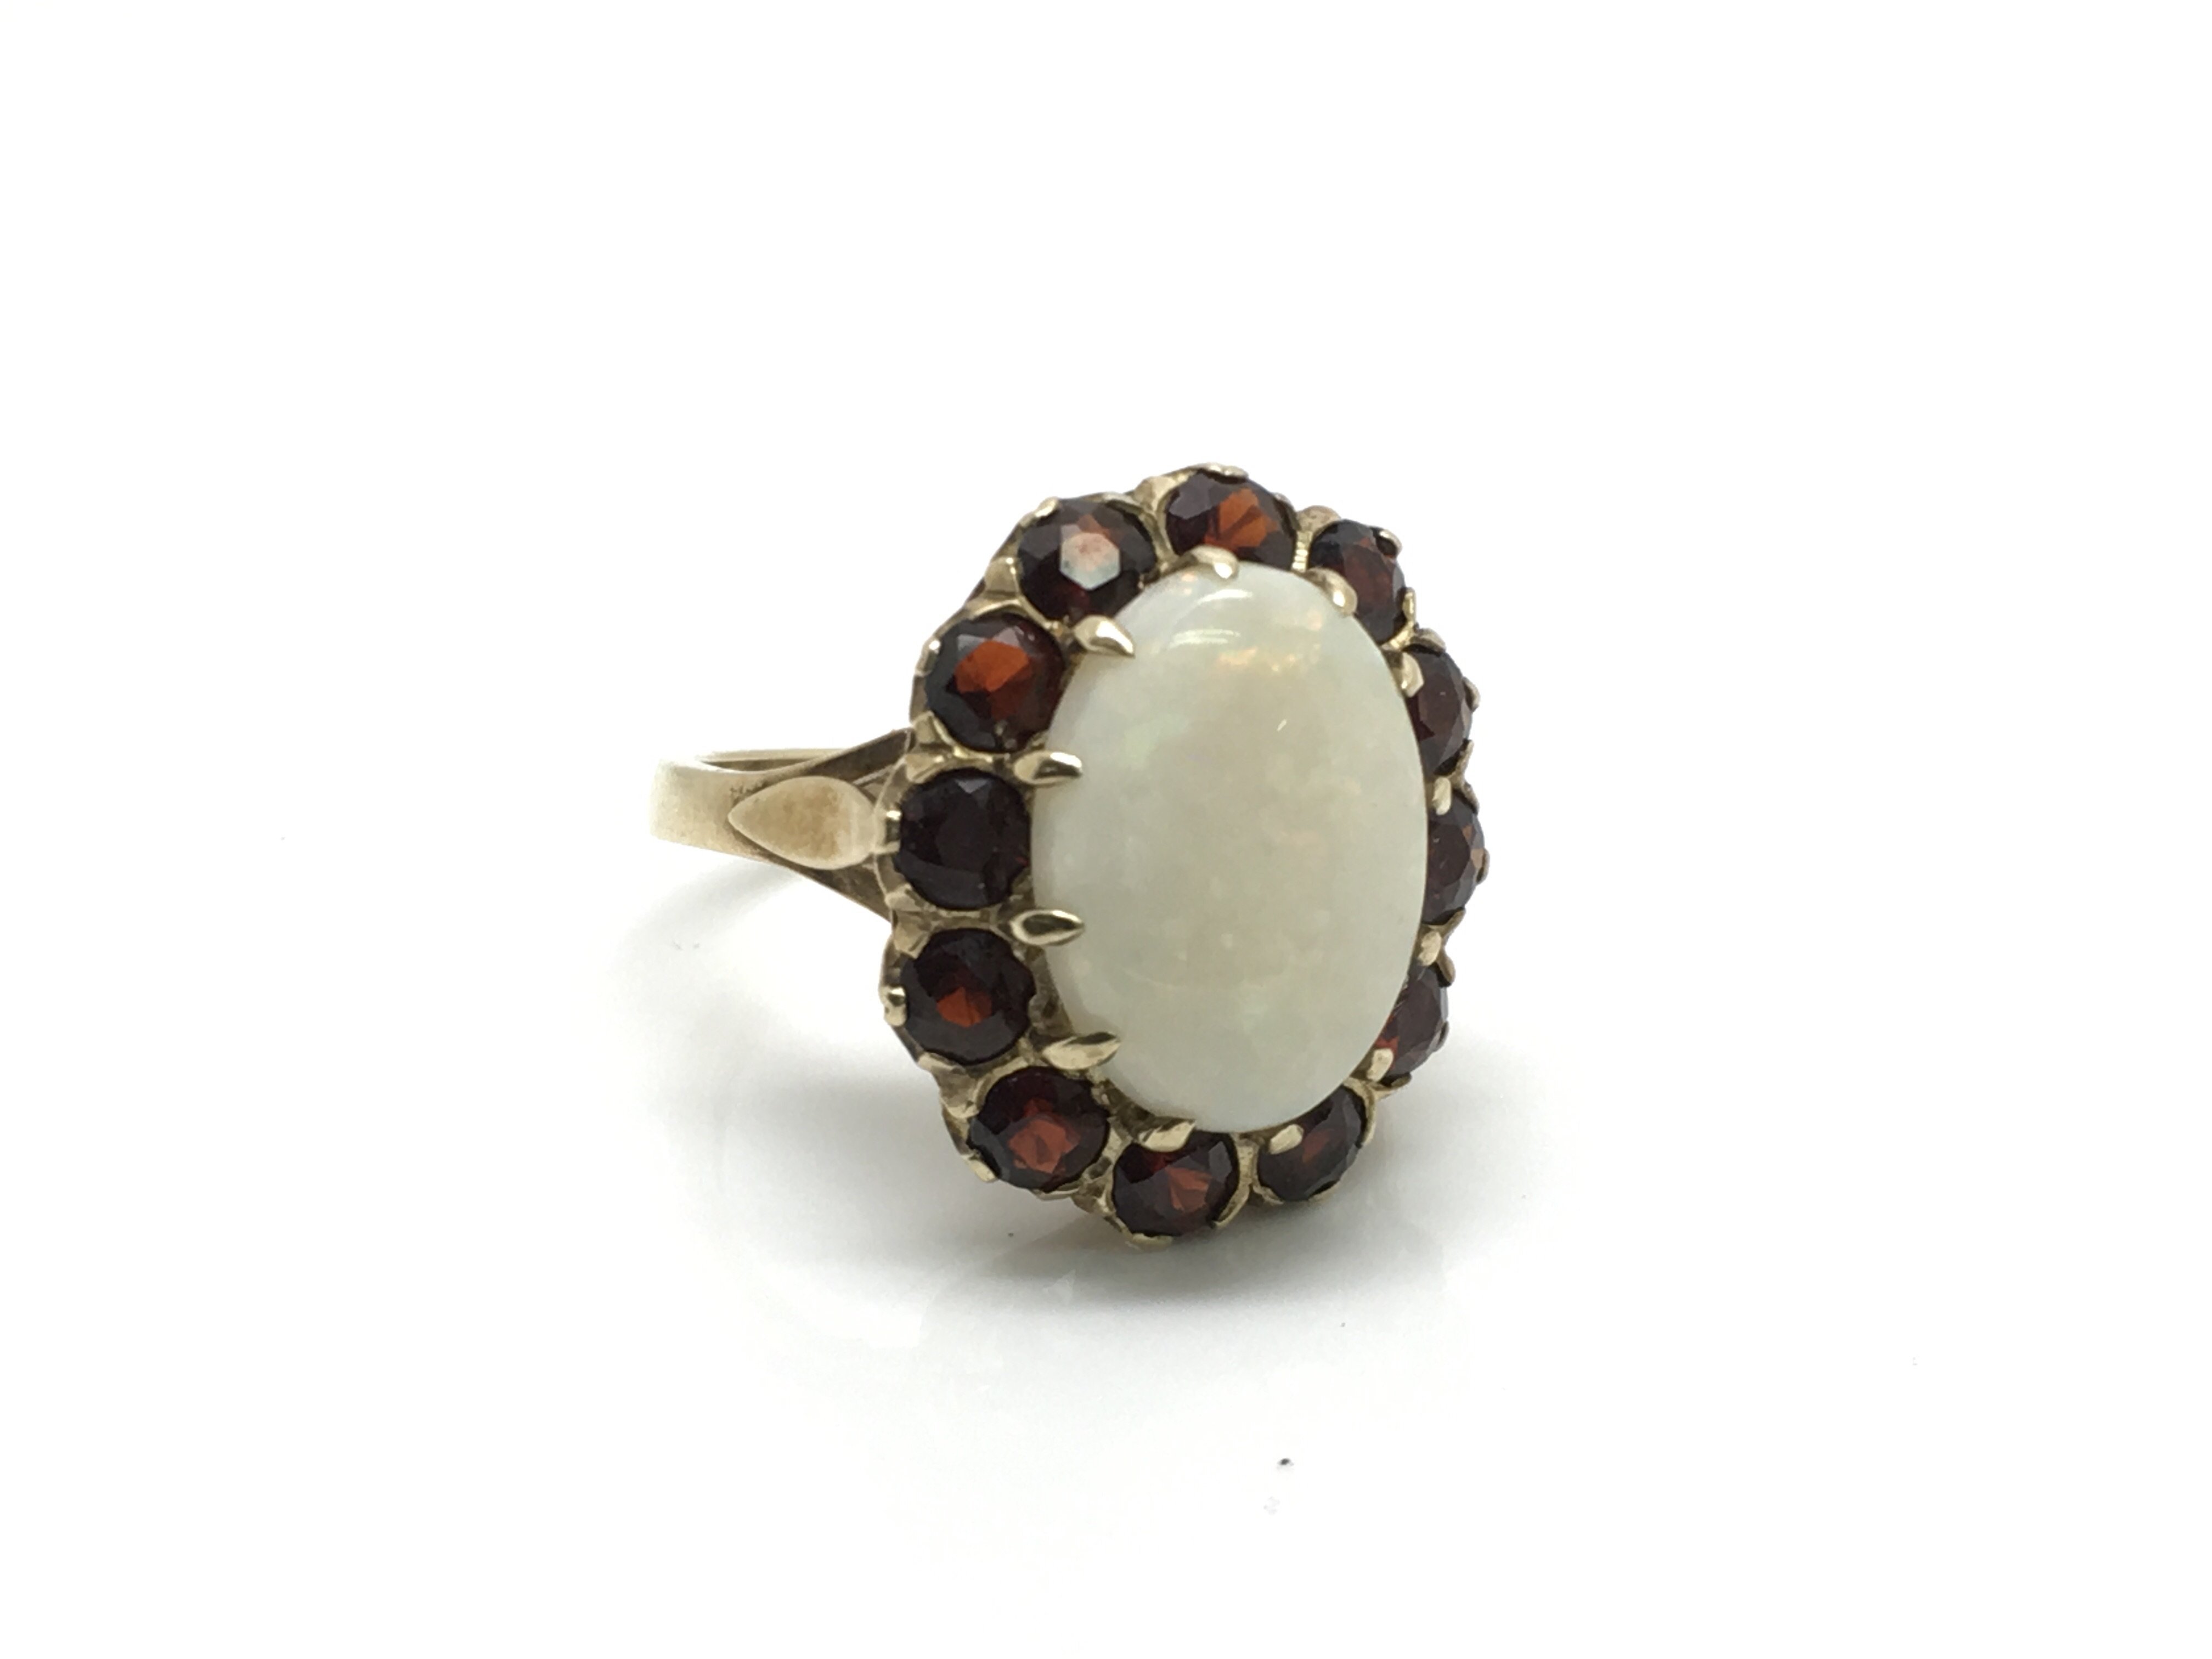 A ladies 9ct gold ring inset with a large central opal surrounded by 12 garnet rubies, ring size